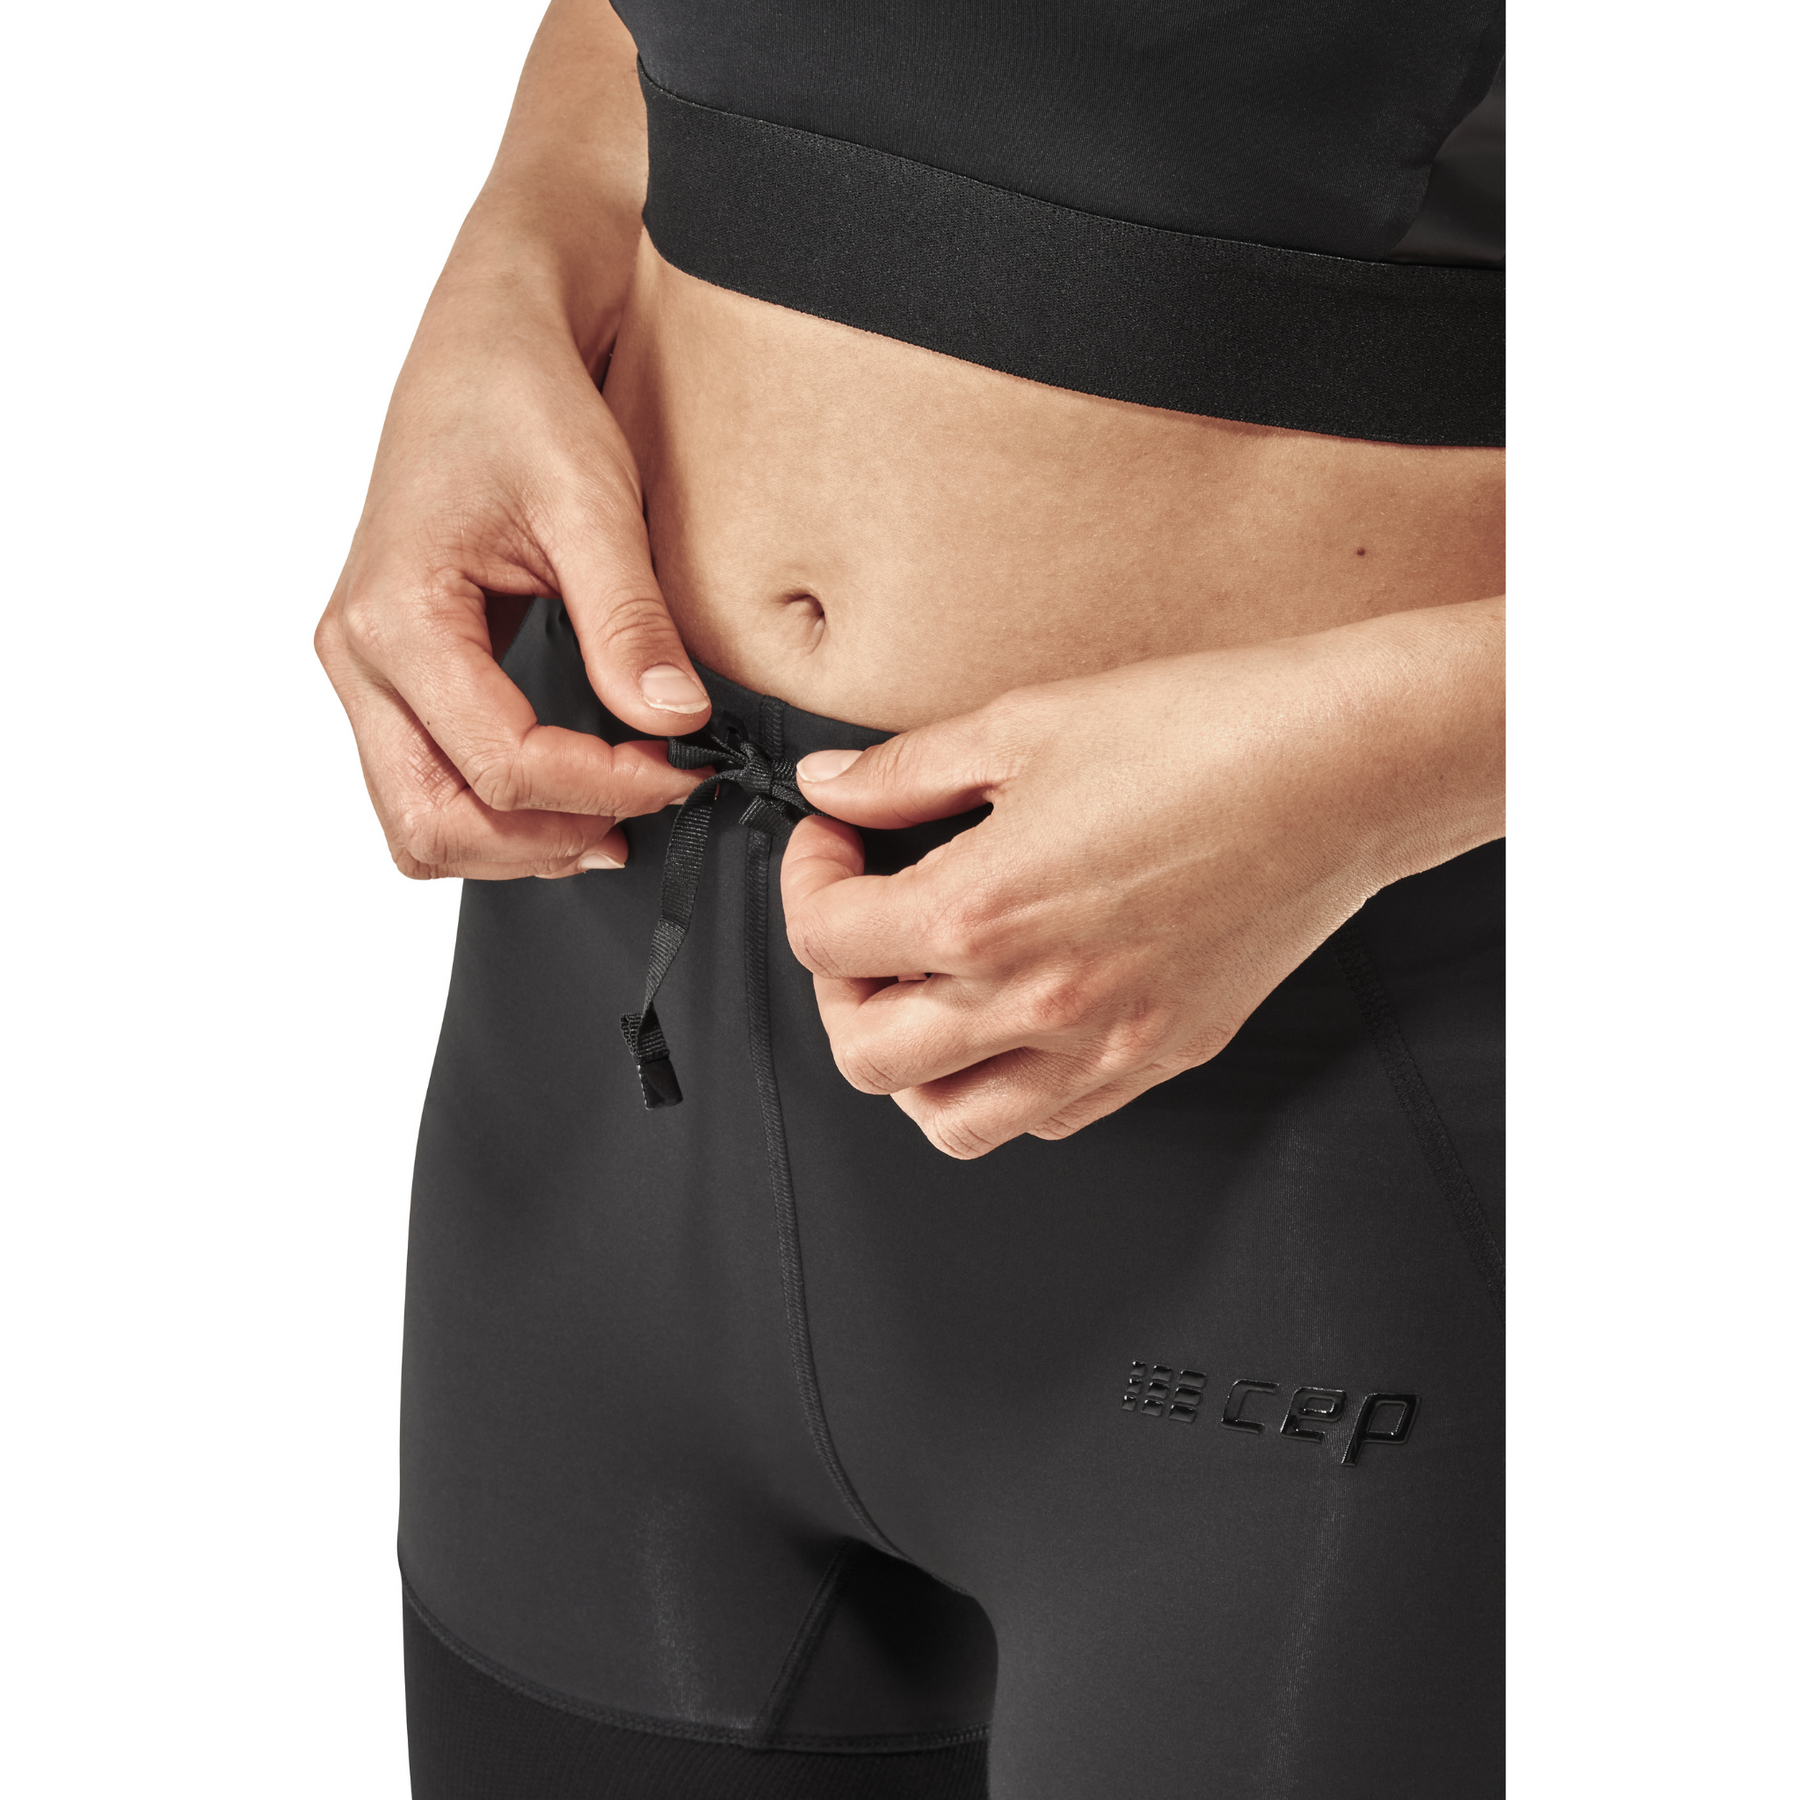 Run Compression Compression CEP 4.0 | Women Sportswear Activating CEP Shorts – for